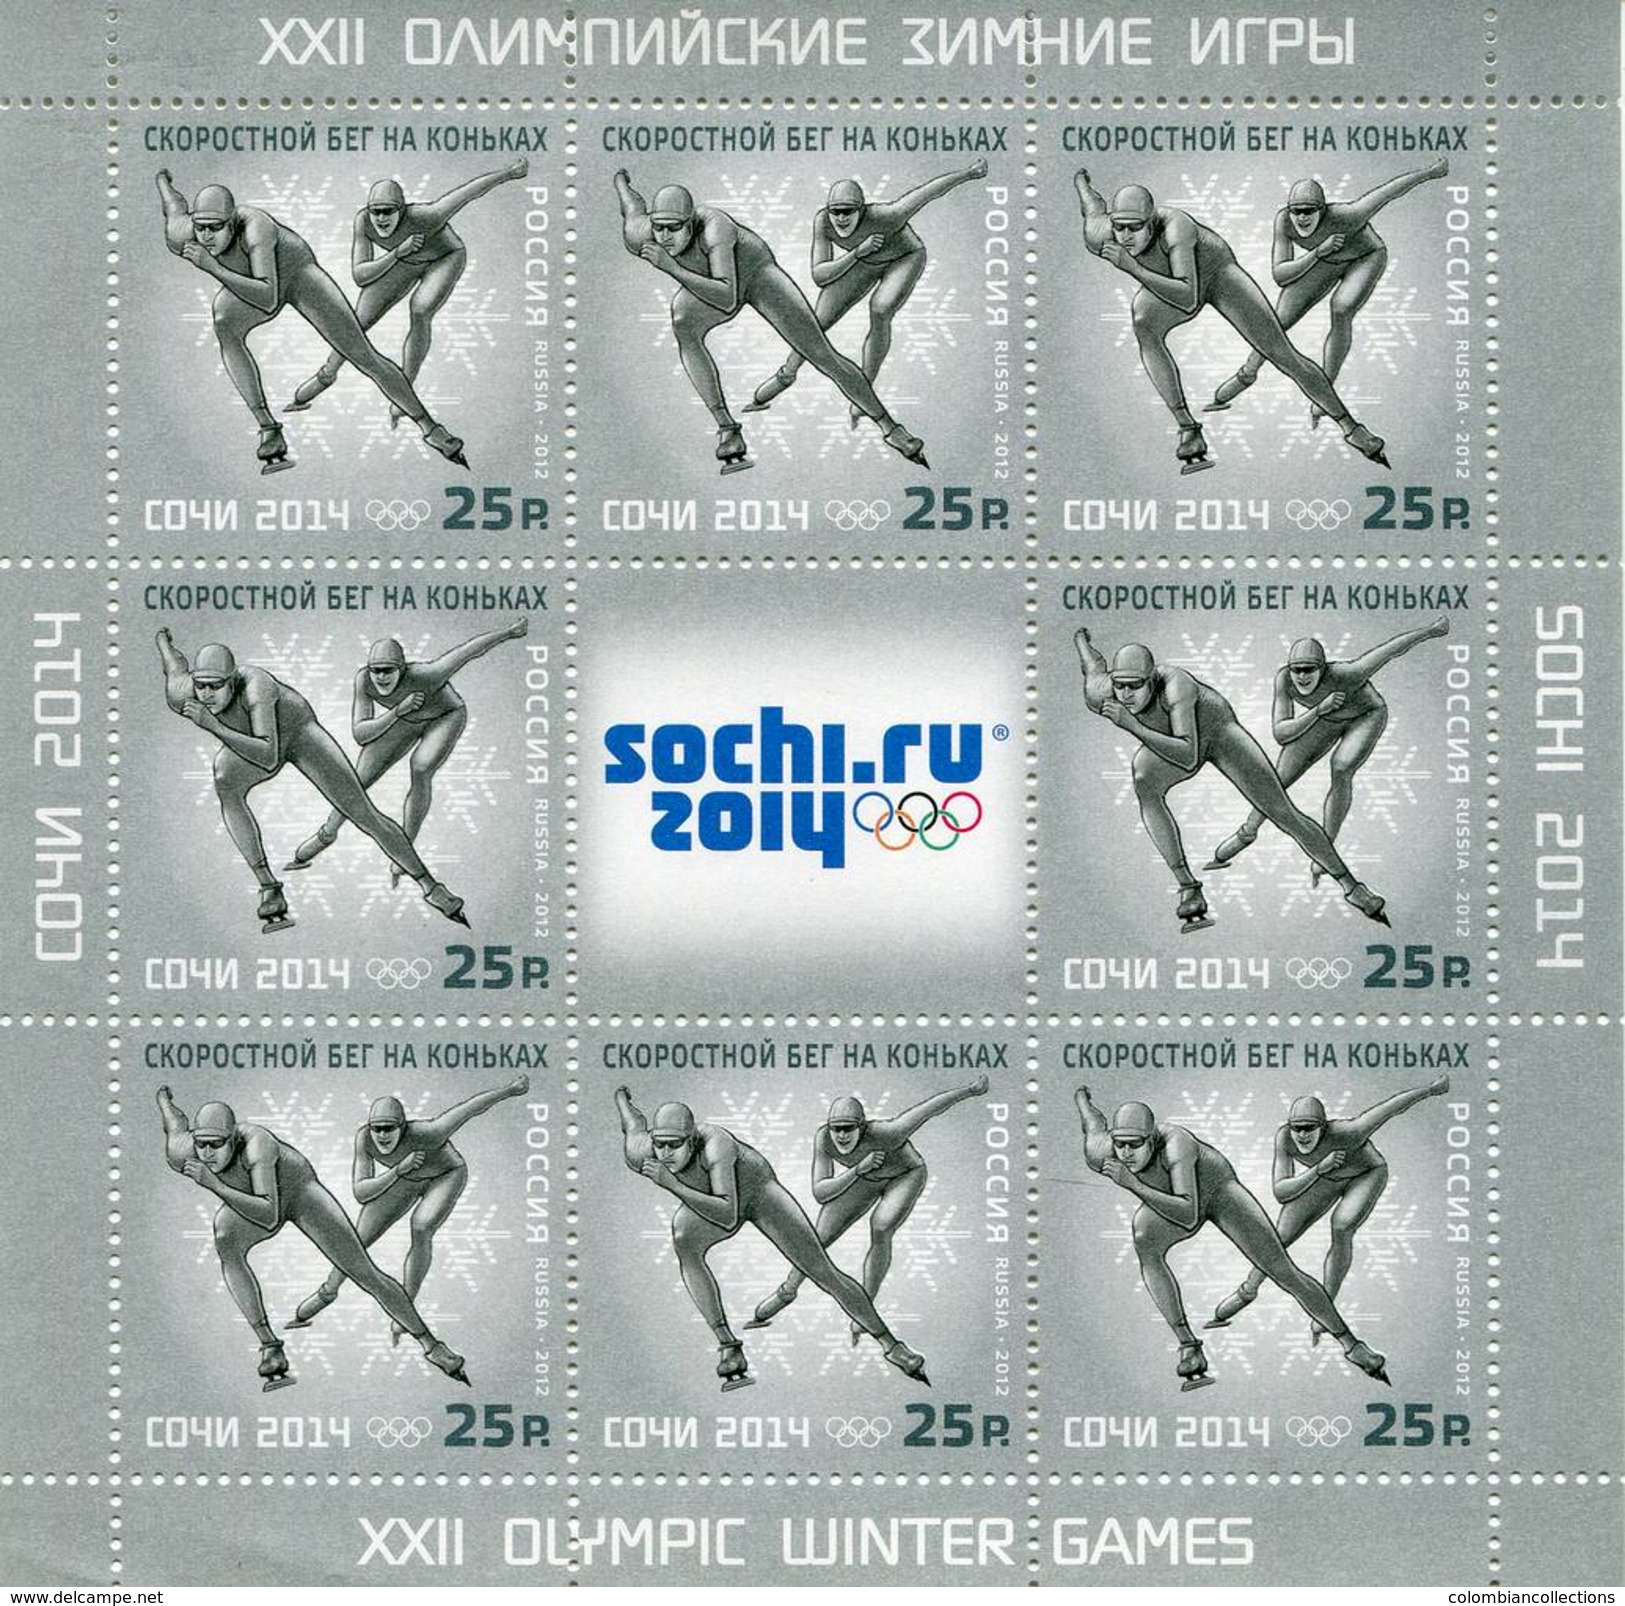 Lote 31256cP, 2012, Rusia, Russia, Pliego, Sheet, Olympic Winter Games, Sochi, Speed-skating - FDC